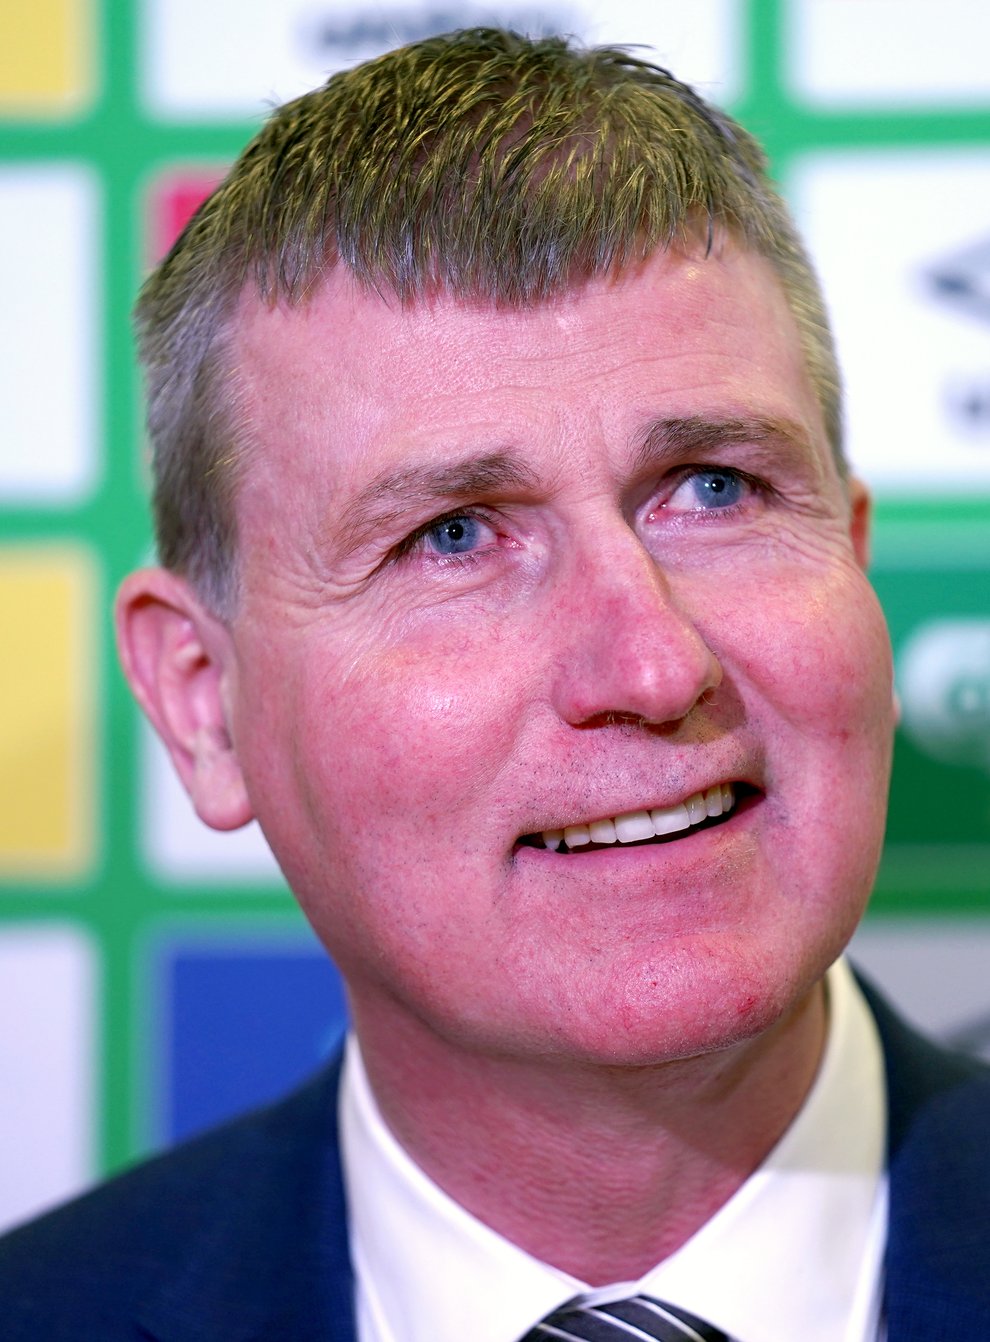 Republic of Ireland manager Stephen Kenny is looking to the future (Brian Lawless/PA)